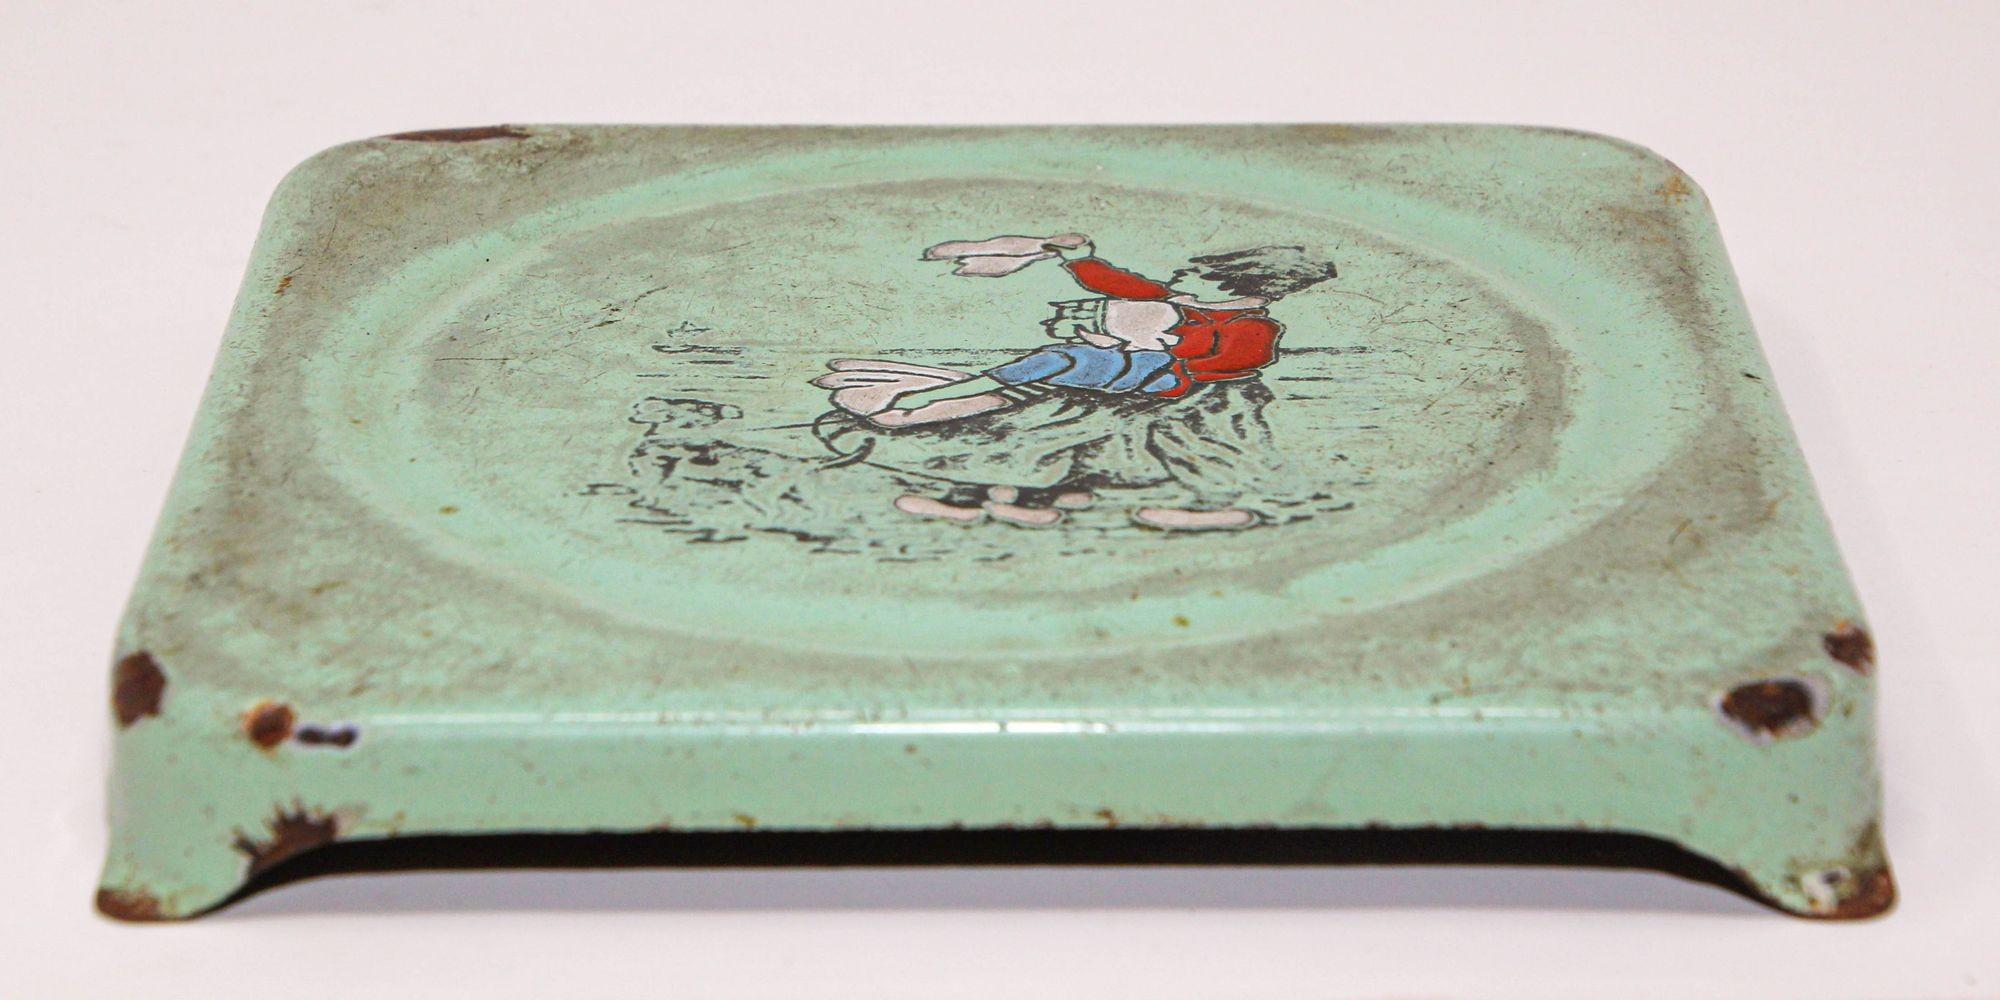 Antique early 20th century Hand Painted Dutch Theme Enamelware Metal trivet 1920's.
Hand-painted decorative antique Dutch scene metalware hand made In North Europe, Netherlands, Dutch or Germany featuring a Dutch man and women waiving goodbye.